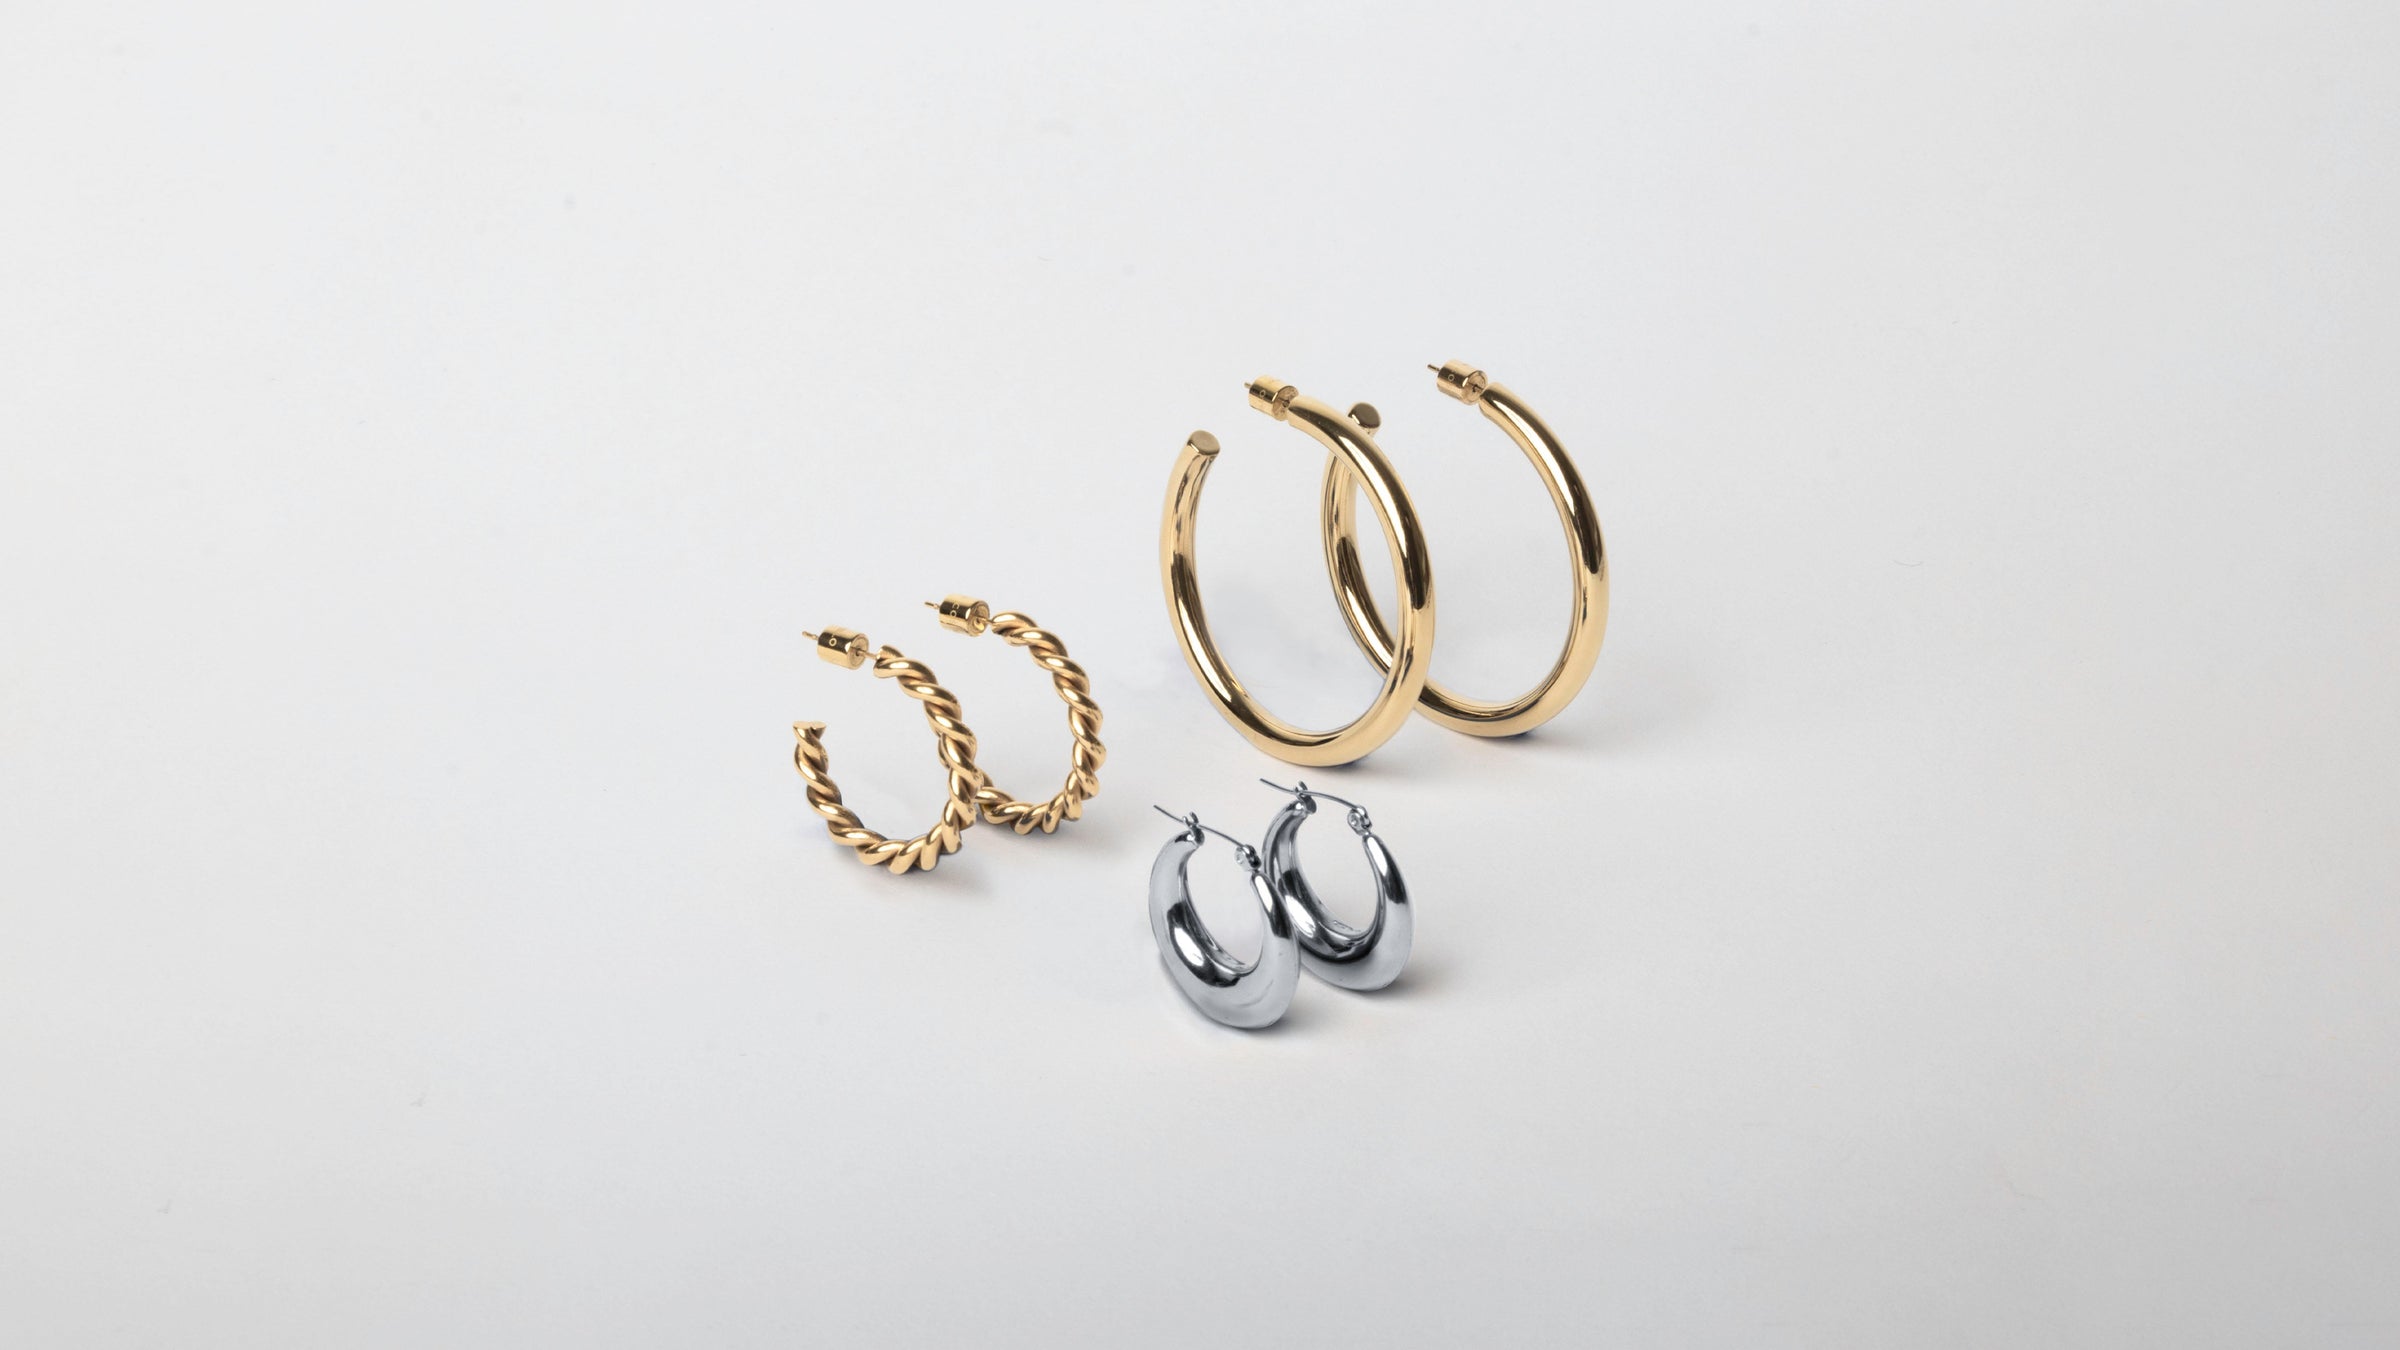 Three MARRIN COSTELLO hoops, showcasing the different styles and sizes of our earrings. Including the Michaela 2" Hoops and Rita Hoops, and Layla Hoops. All earrings are available in 14k gold plated stainless steel and polished stainless steel.